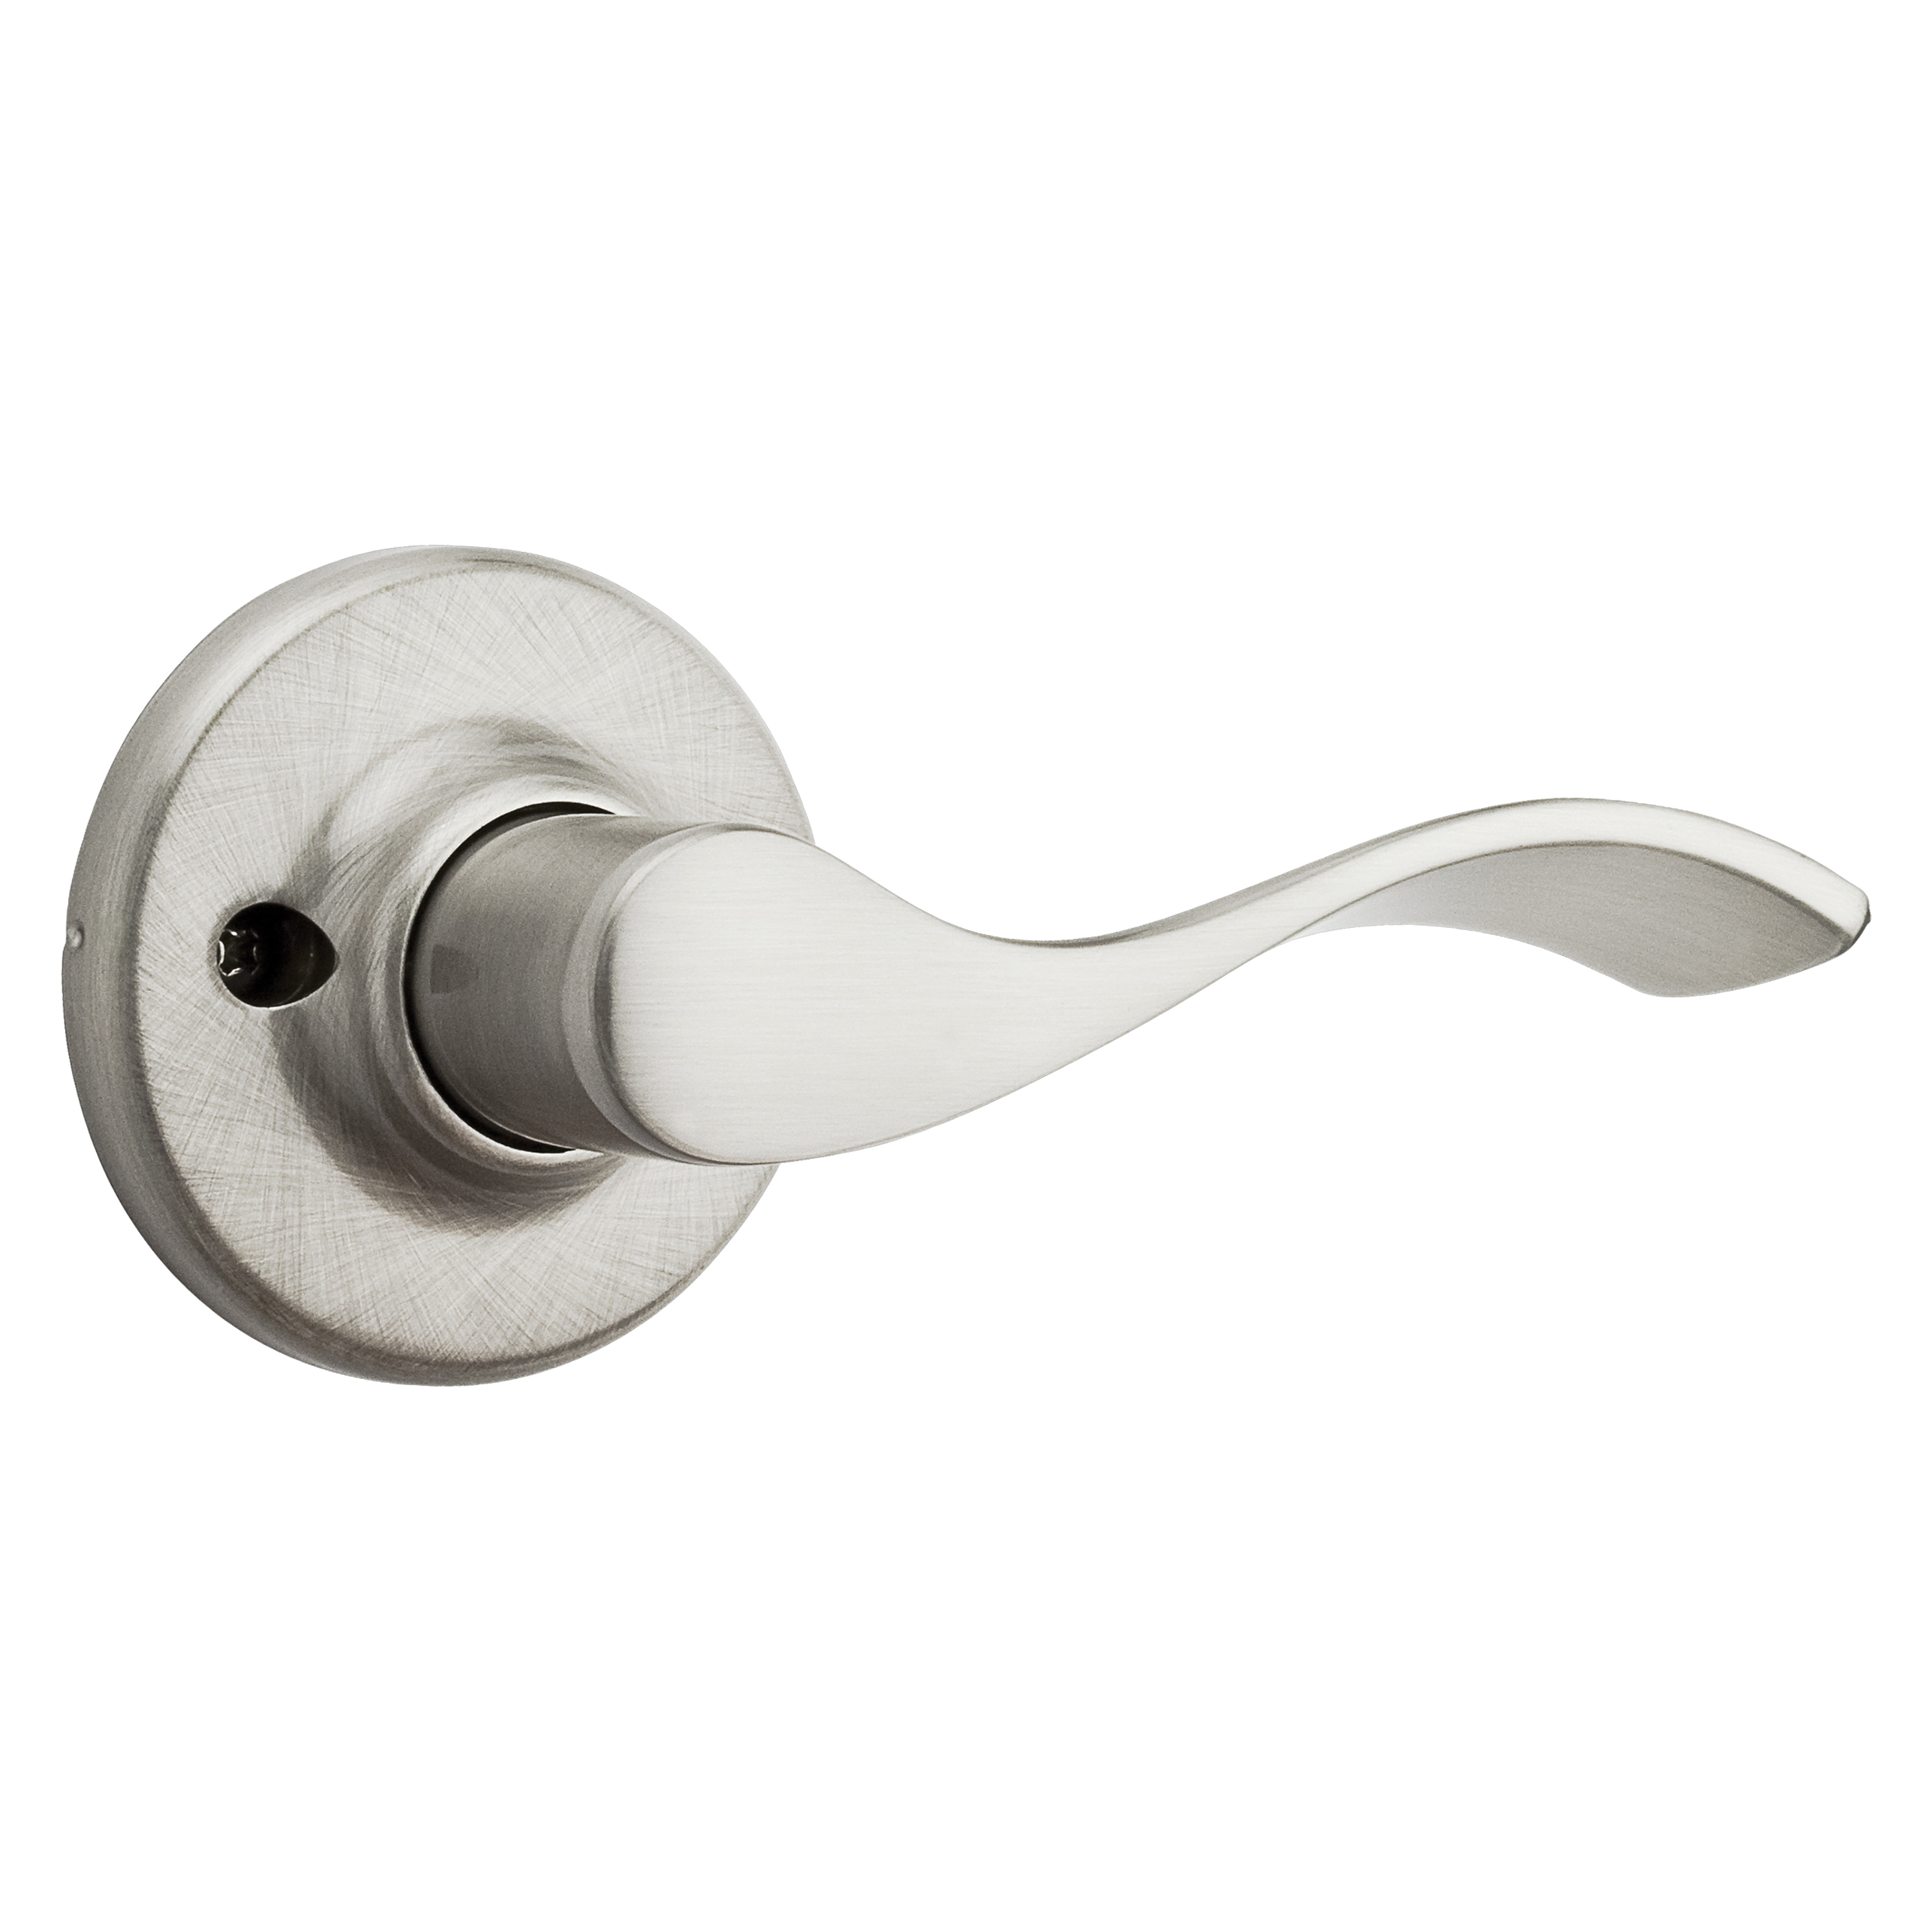 94880-496 Half Inactive Dummy Lever, Satin Nickel, Zinc, Residential, Re-Key Technology: SmartKey, Right Hand